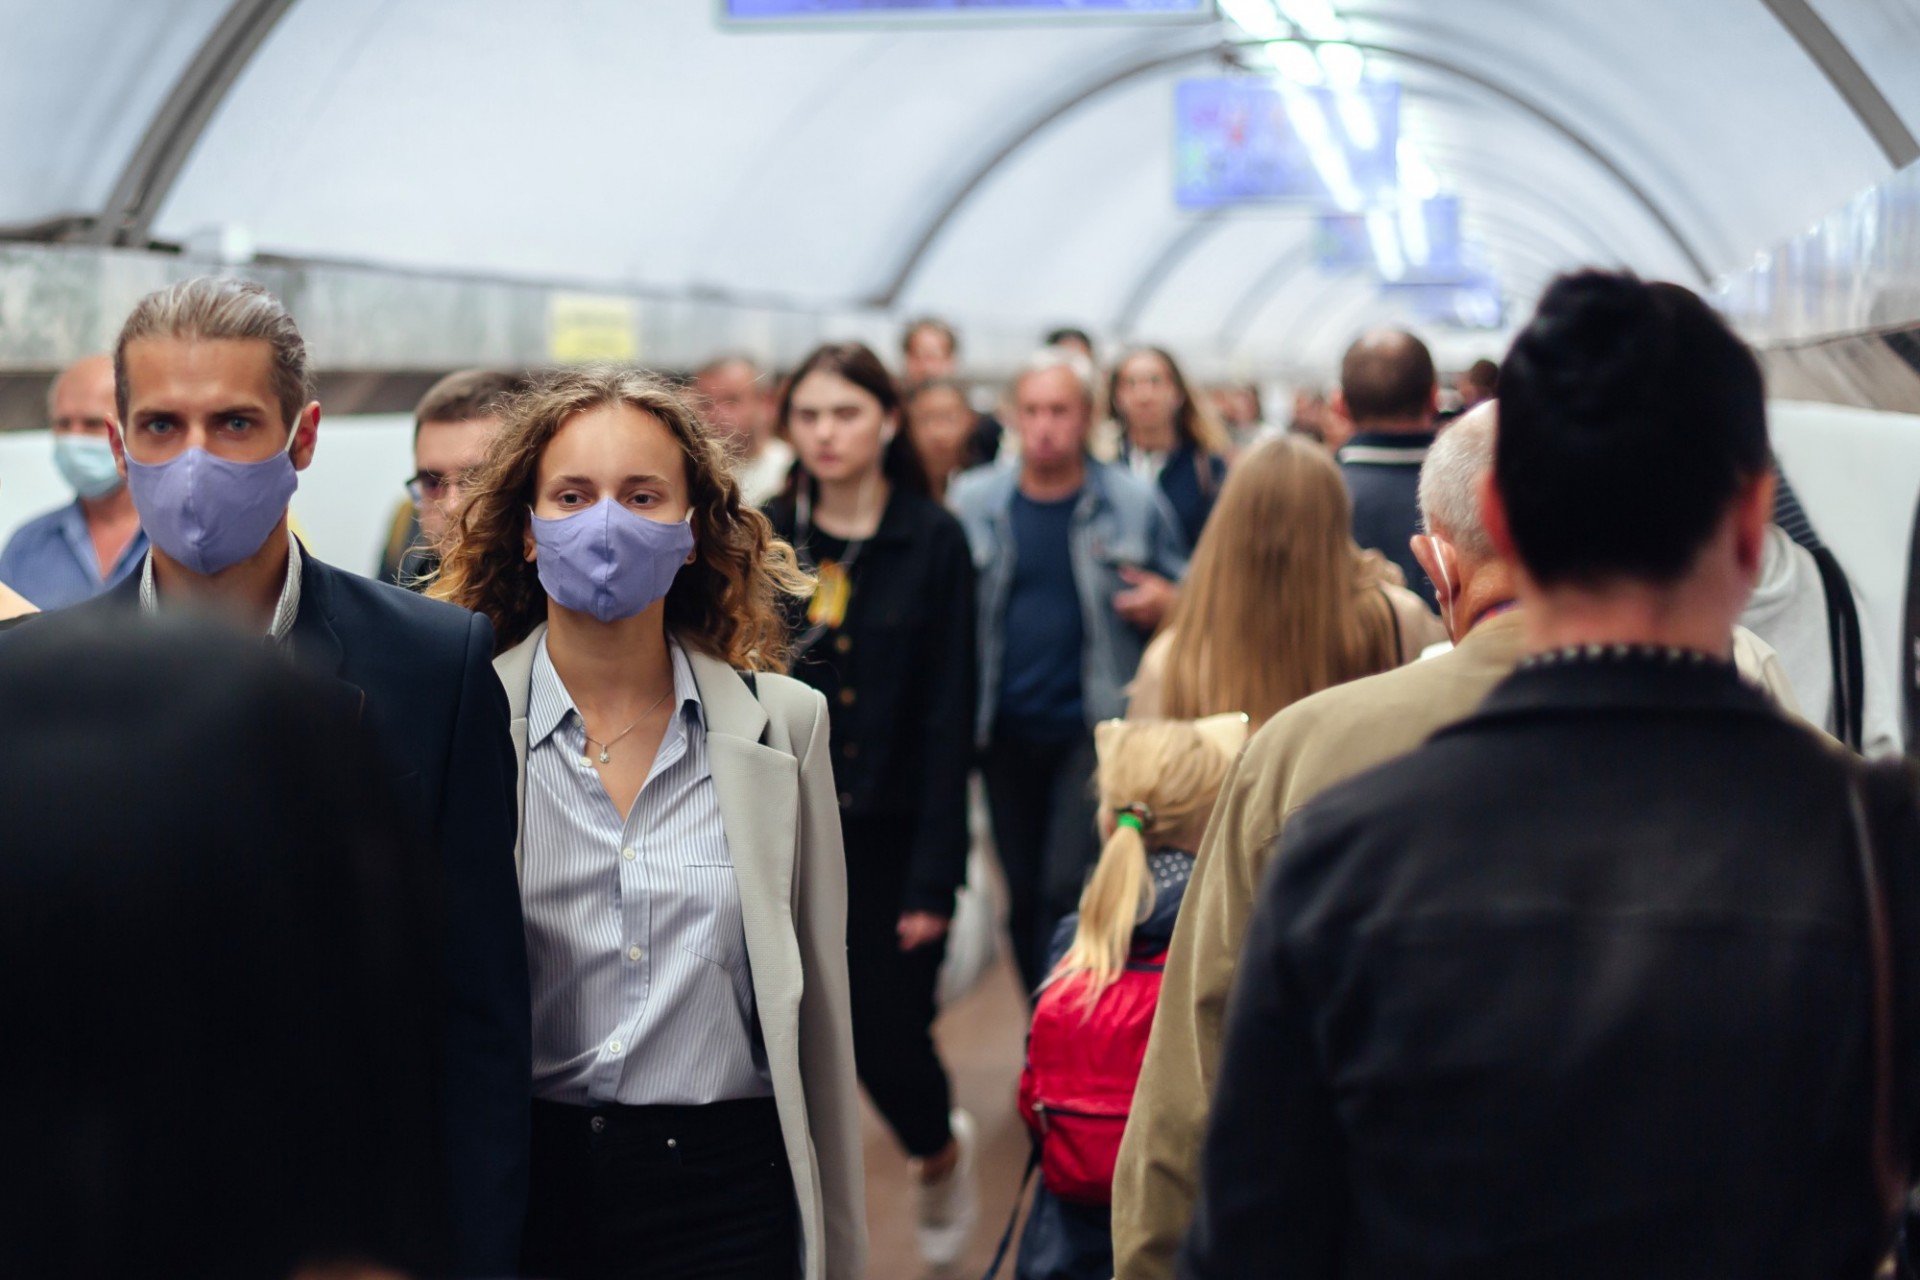 People in a crowded area, wearing masks